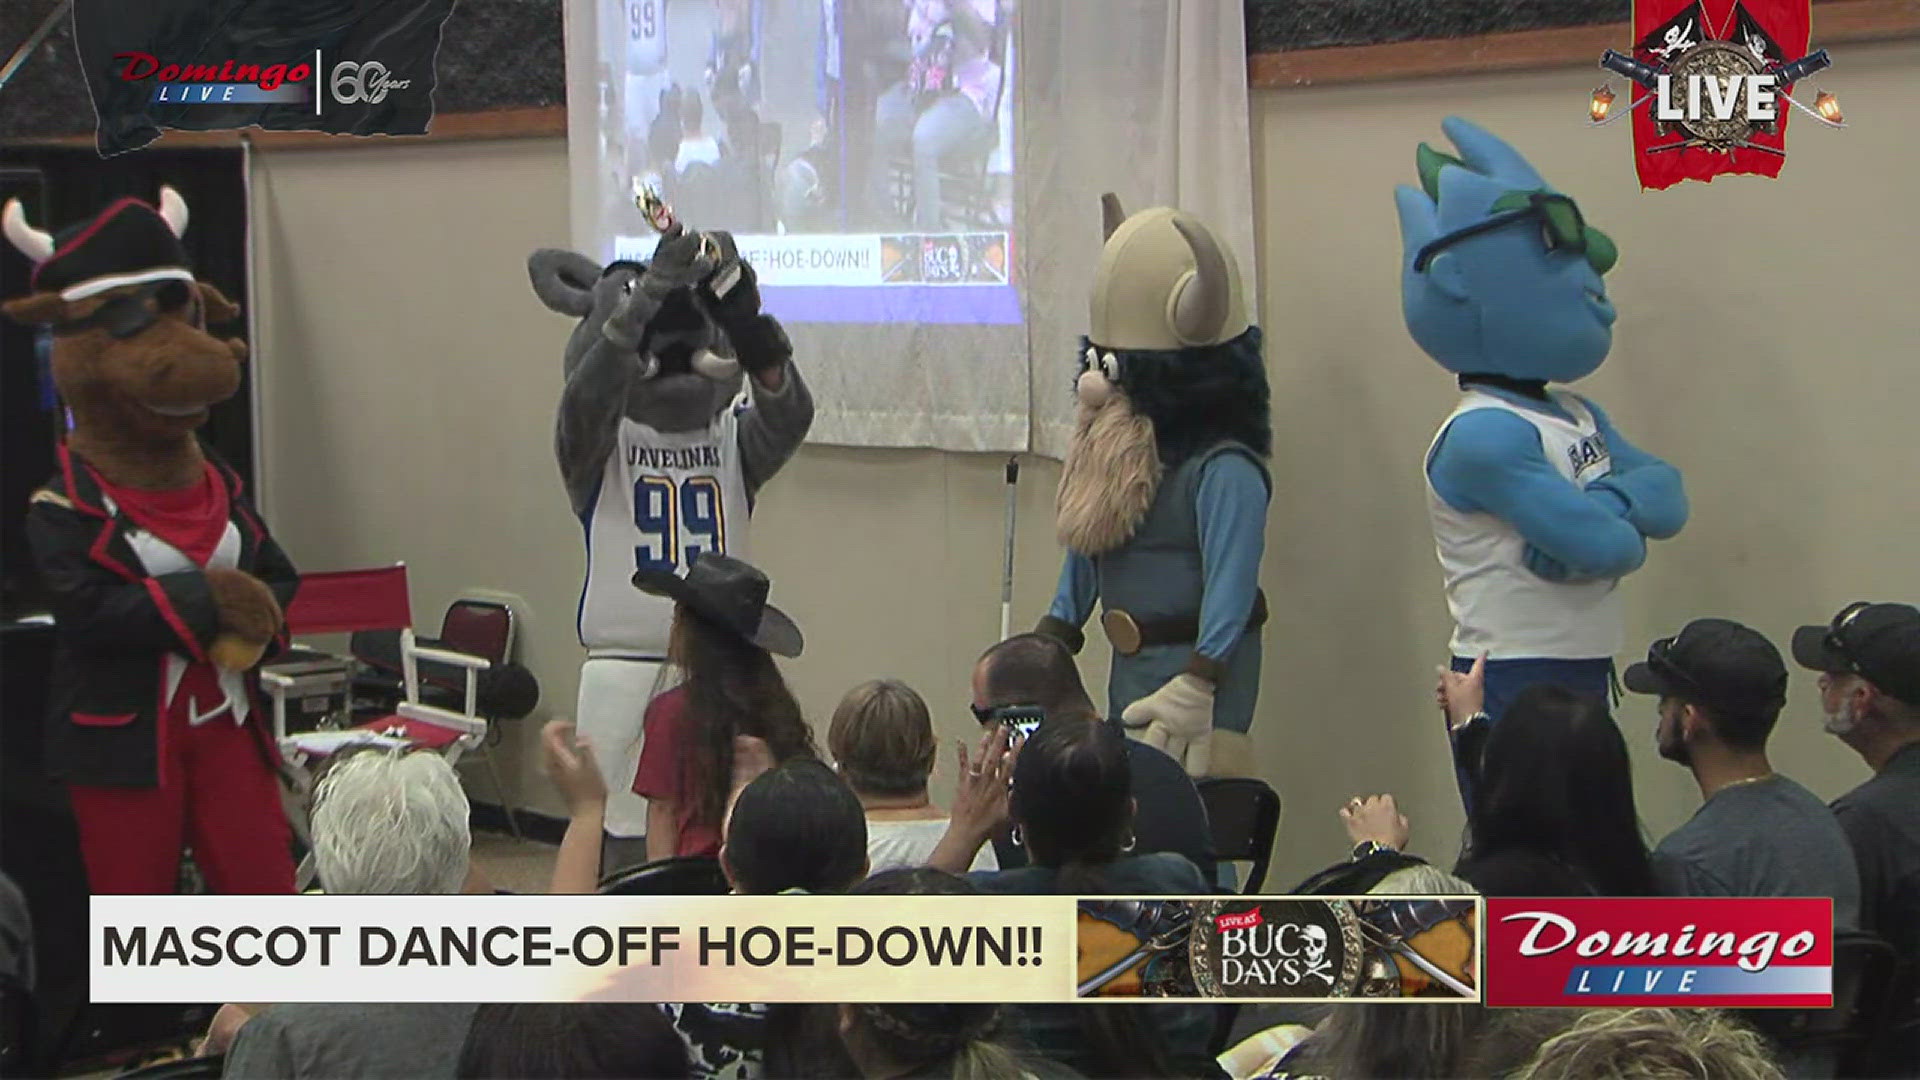 The A&M-Kingsville mascot had quite the fan club in attendance.